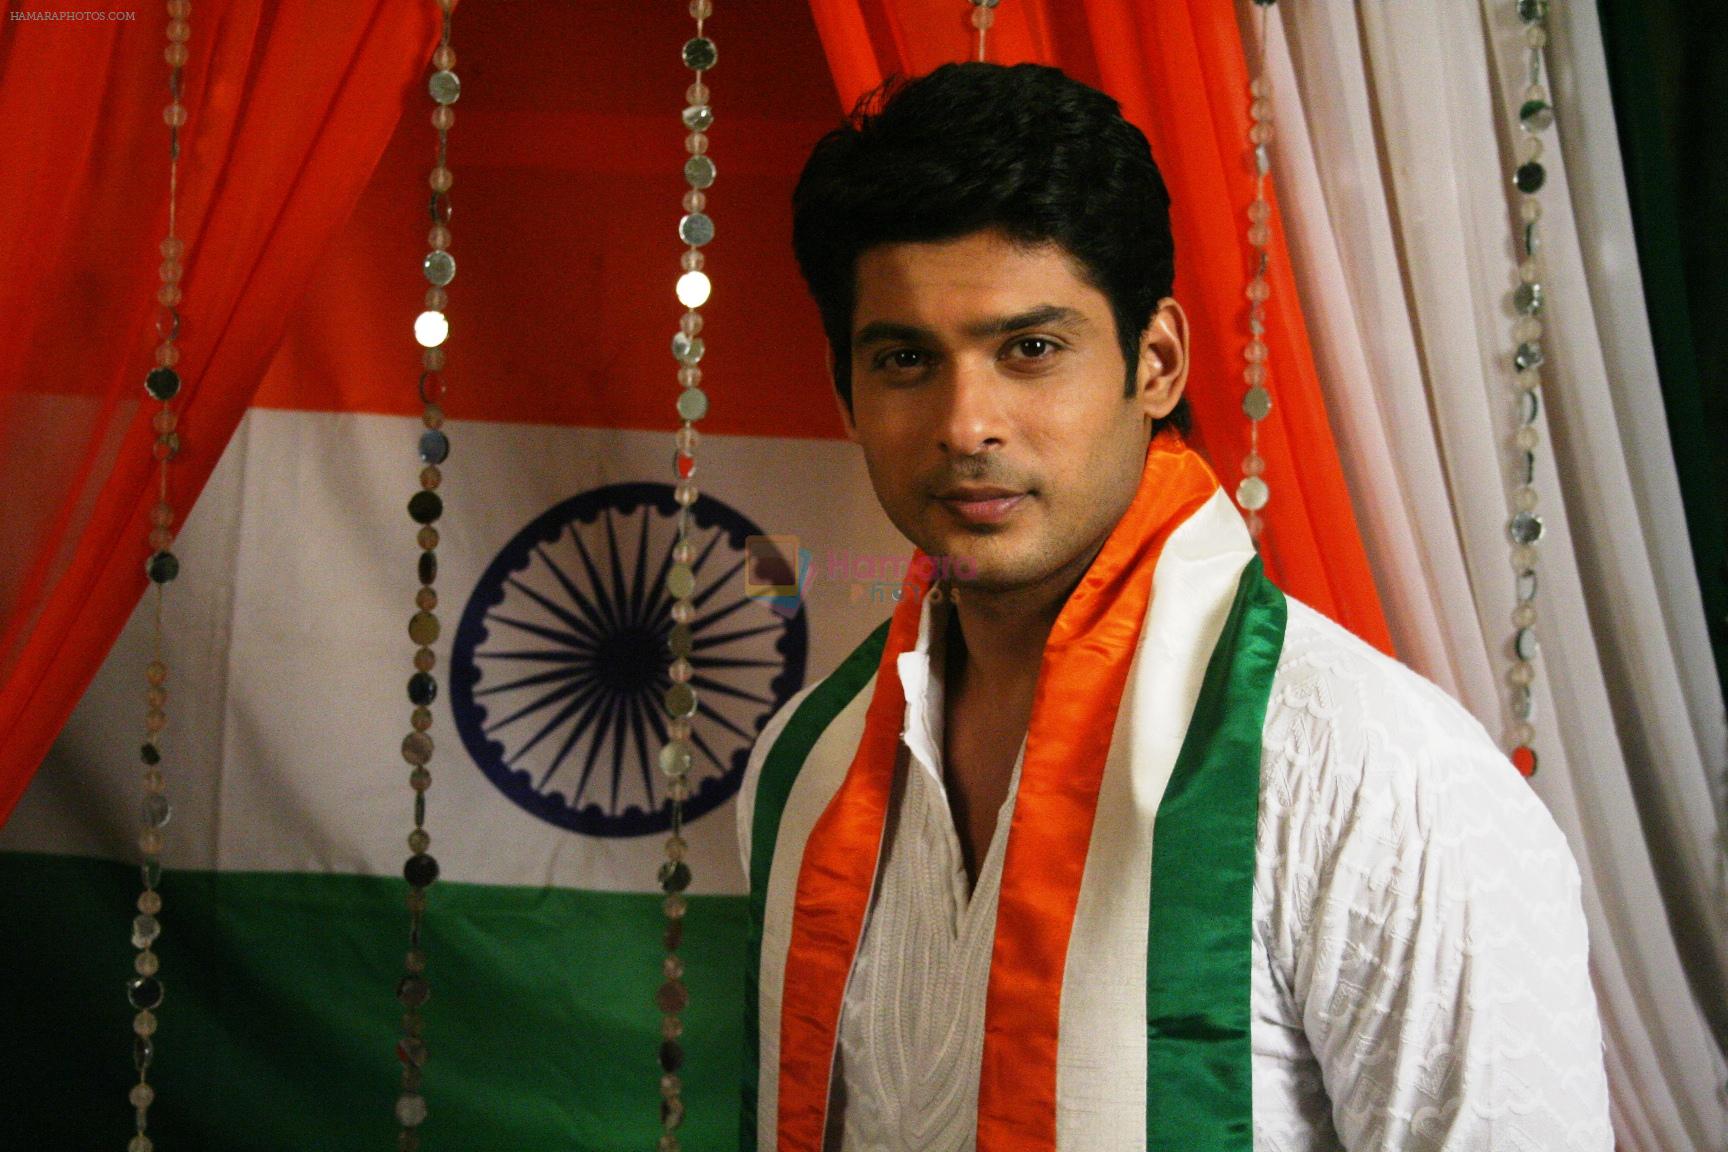 siddharth shukla as shiv at COLORS Independence Day Celebration